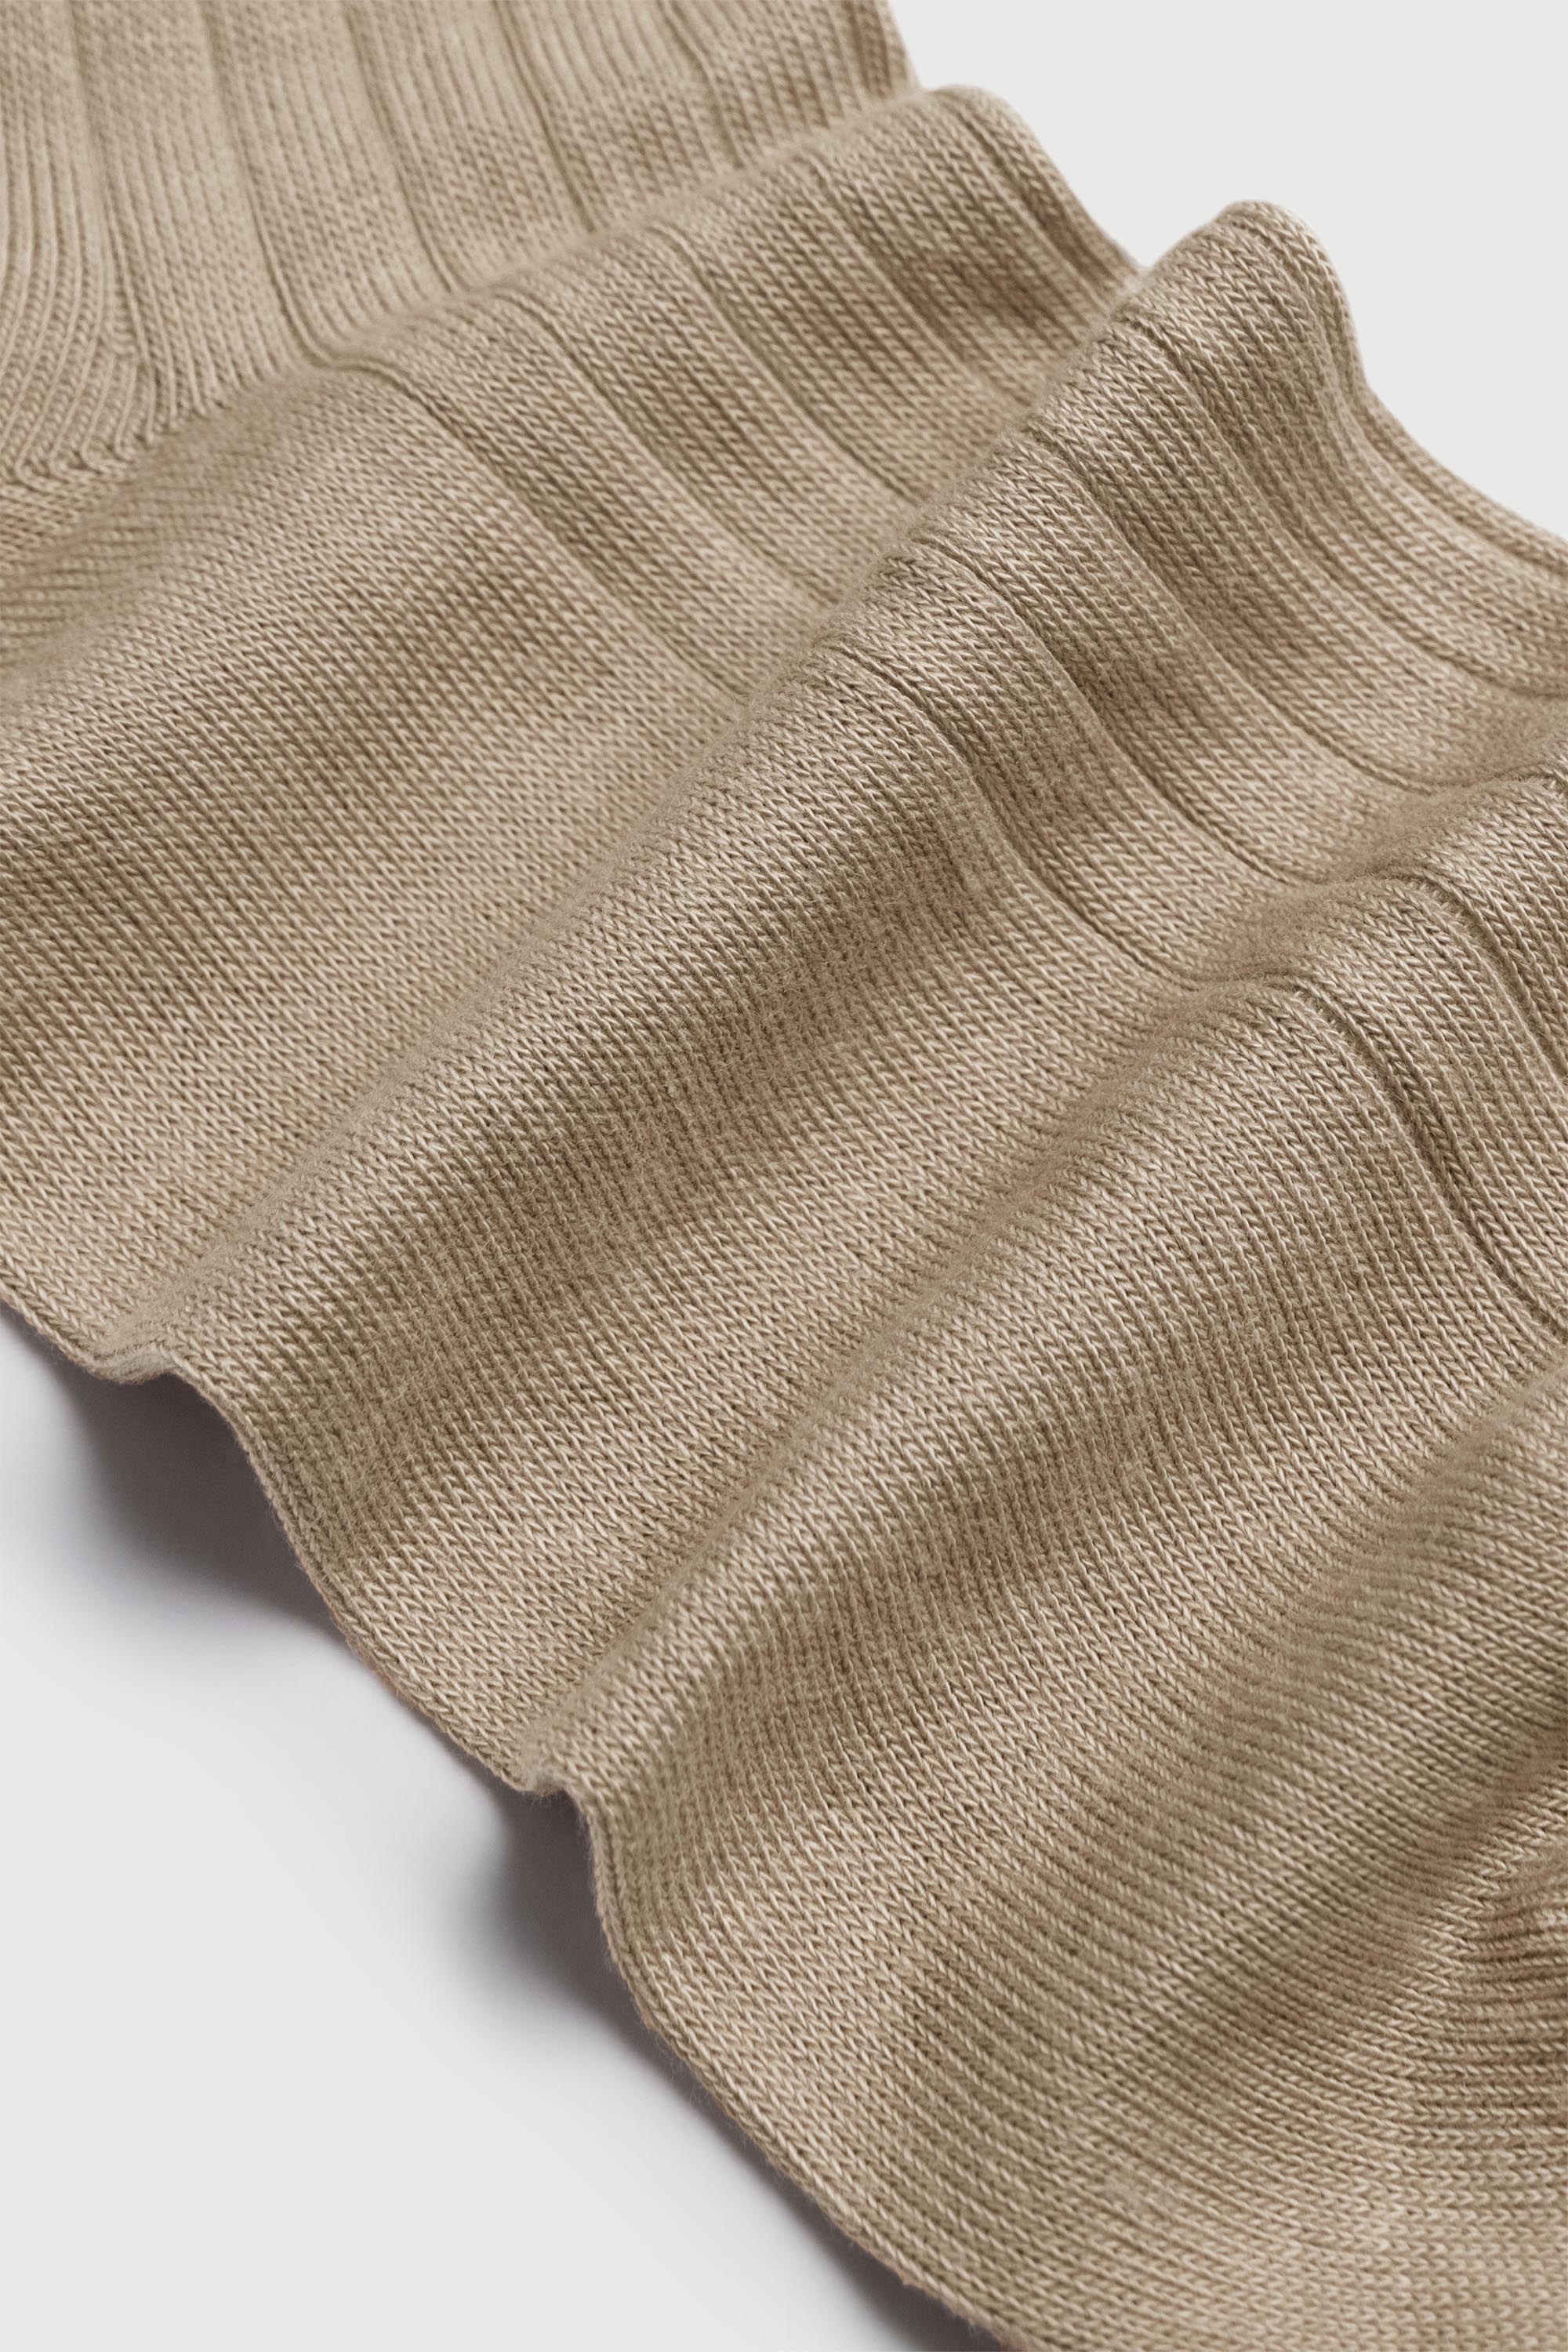 Footbed detail, The Yves Sock in Khaki, Egyptian cotton sock by Comme Si